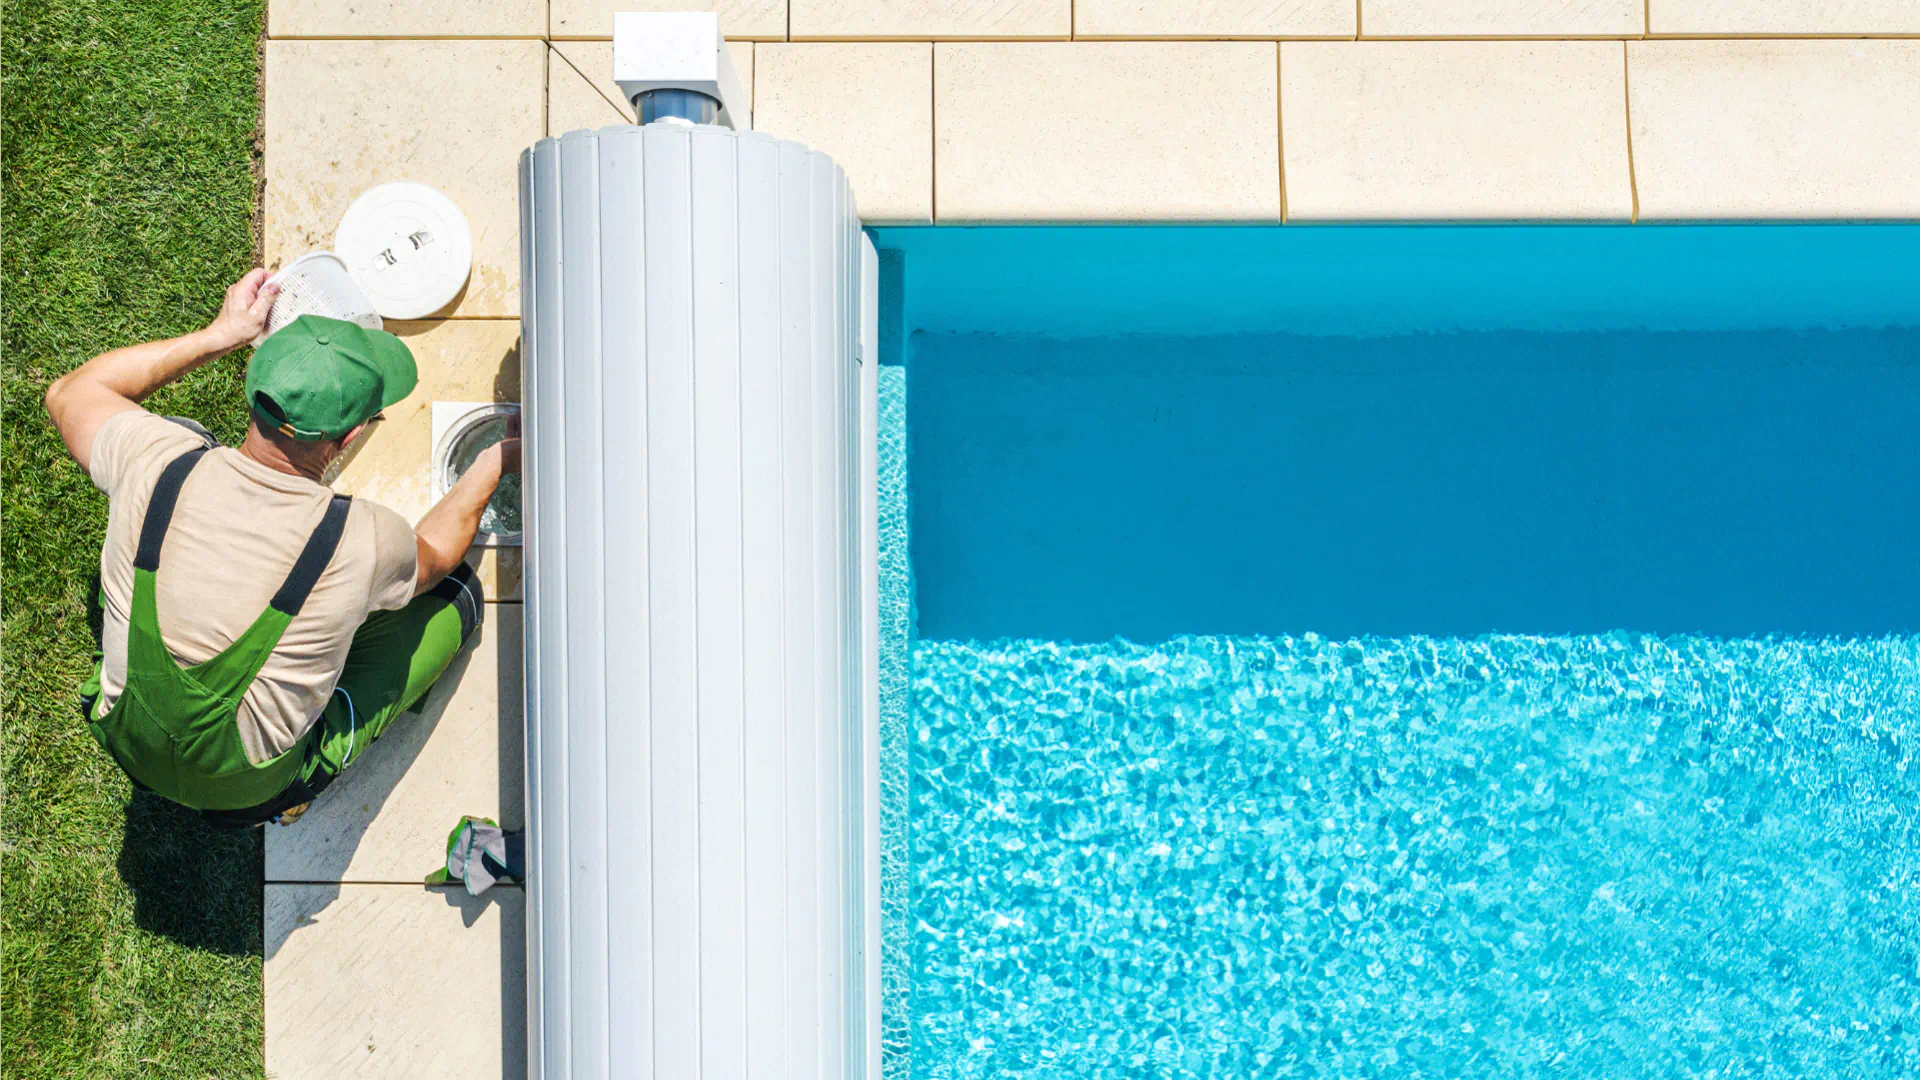 man maintaining cleanliness of pool through the filters